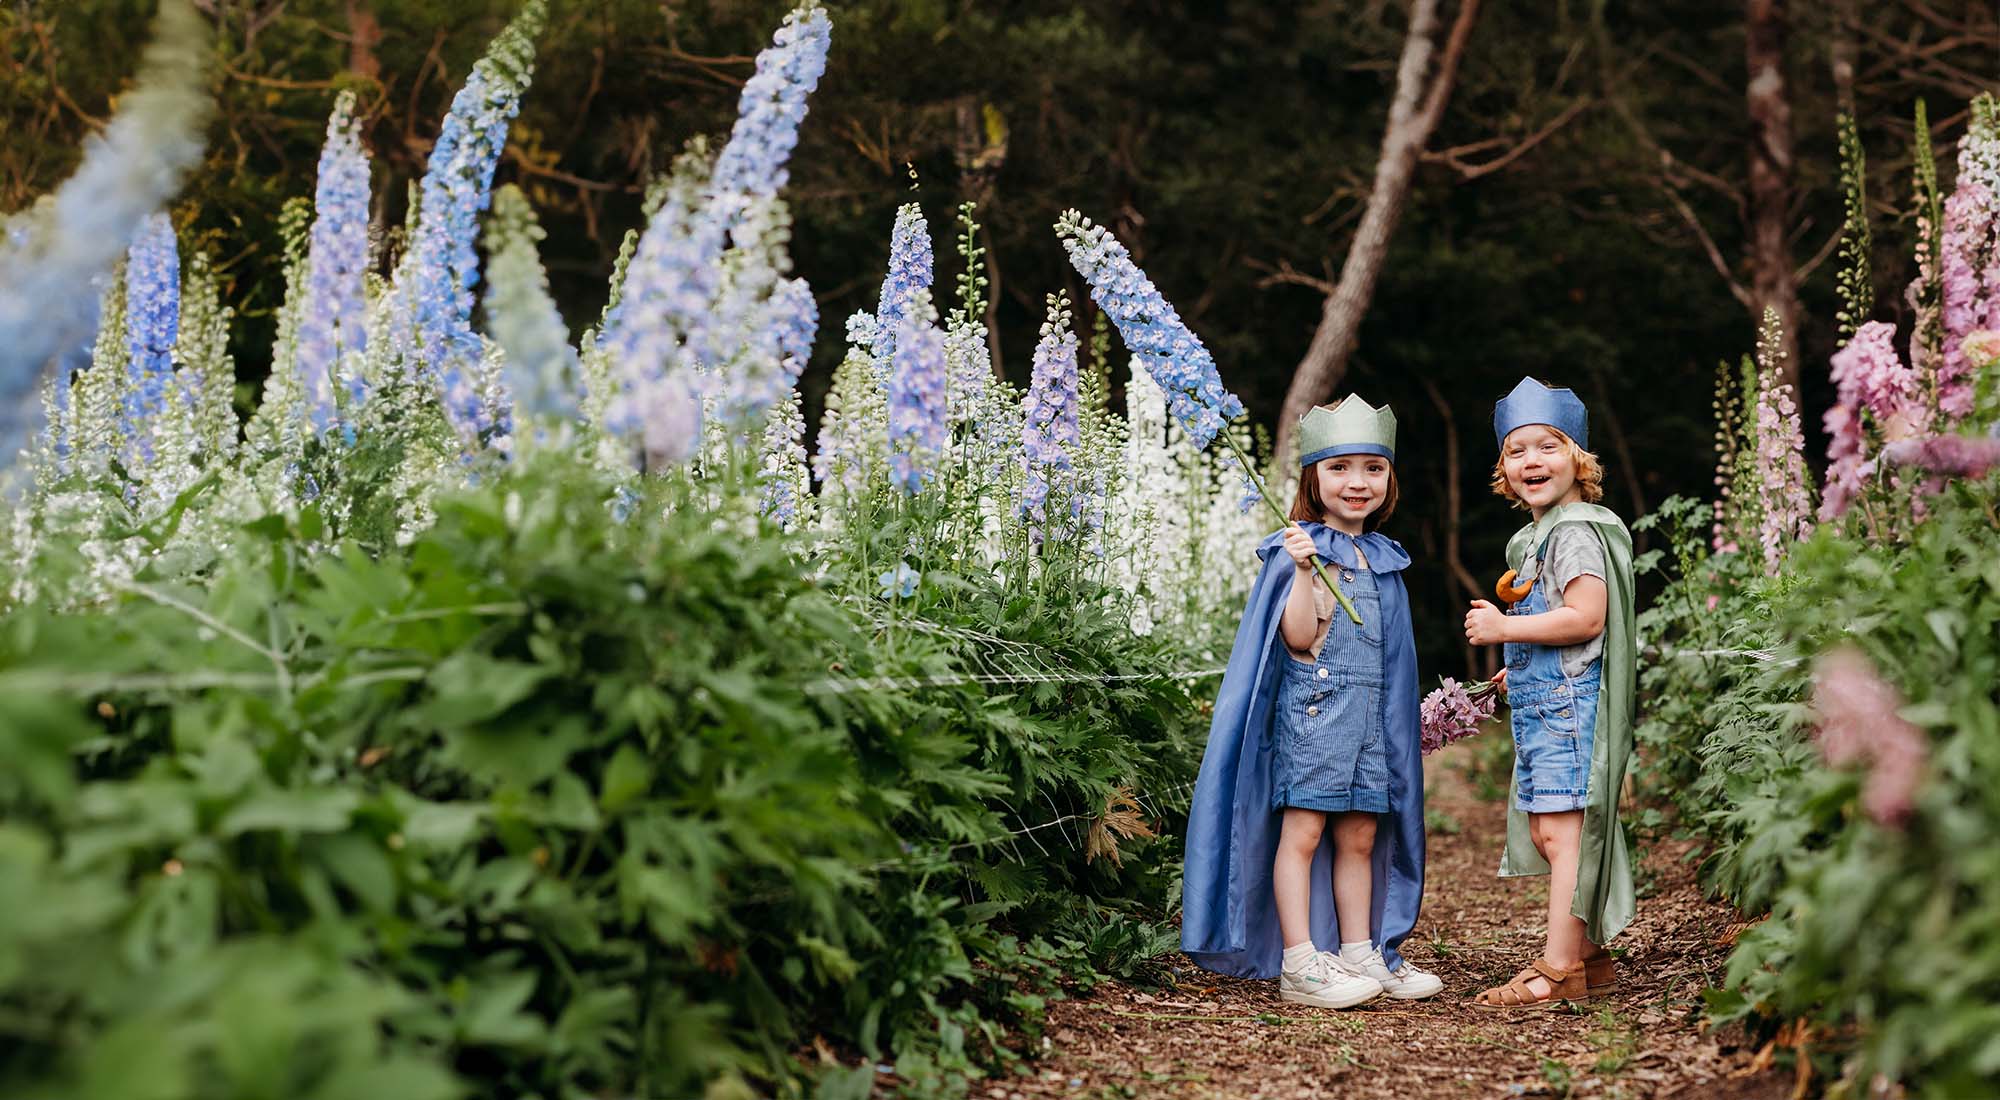 Two kids are dressed in play silks running through a field of flowers